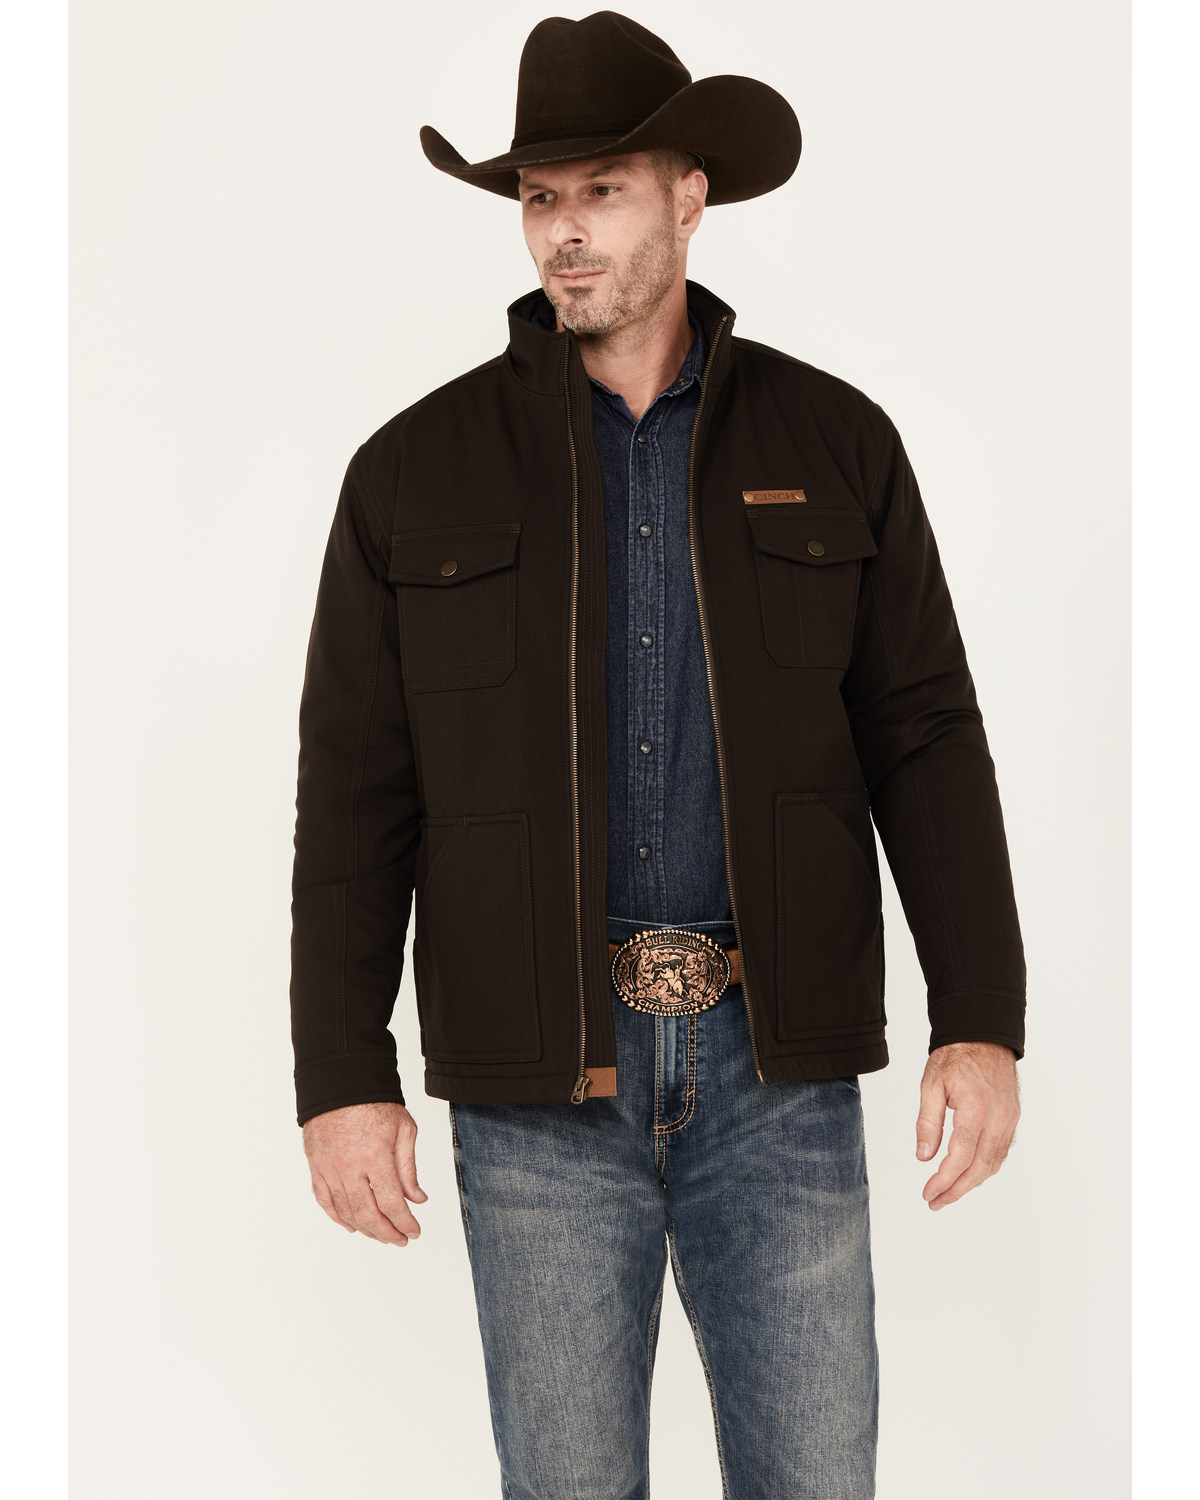 Cinch Men's Textured Insulated Concealed Carry Jacket